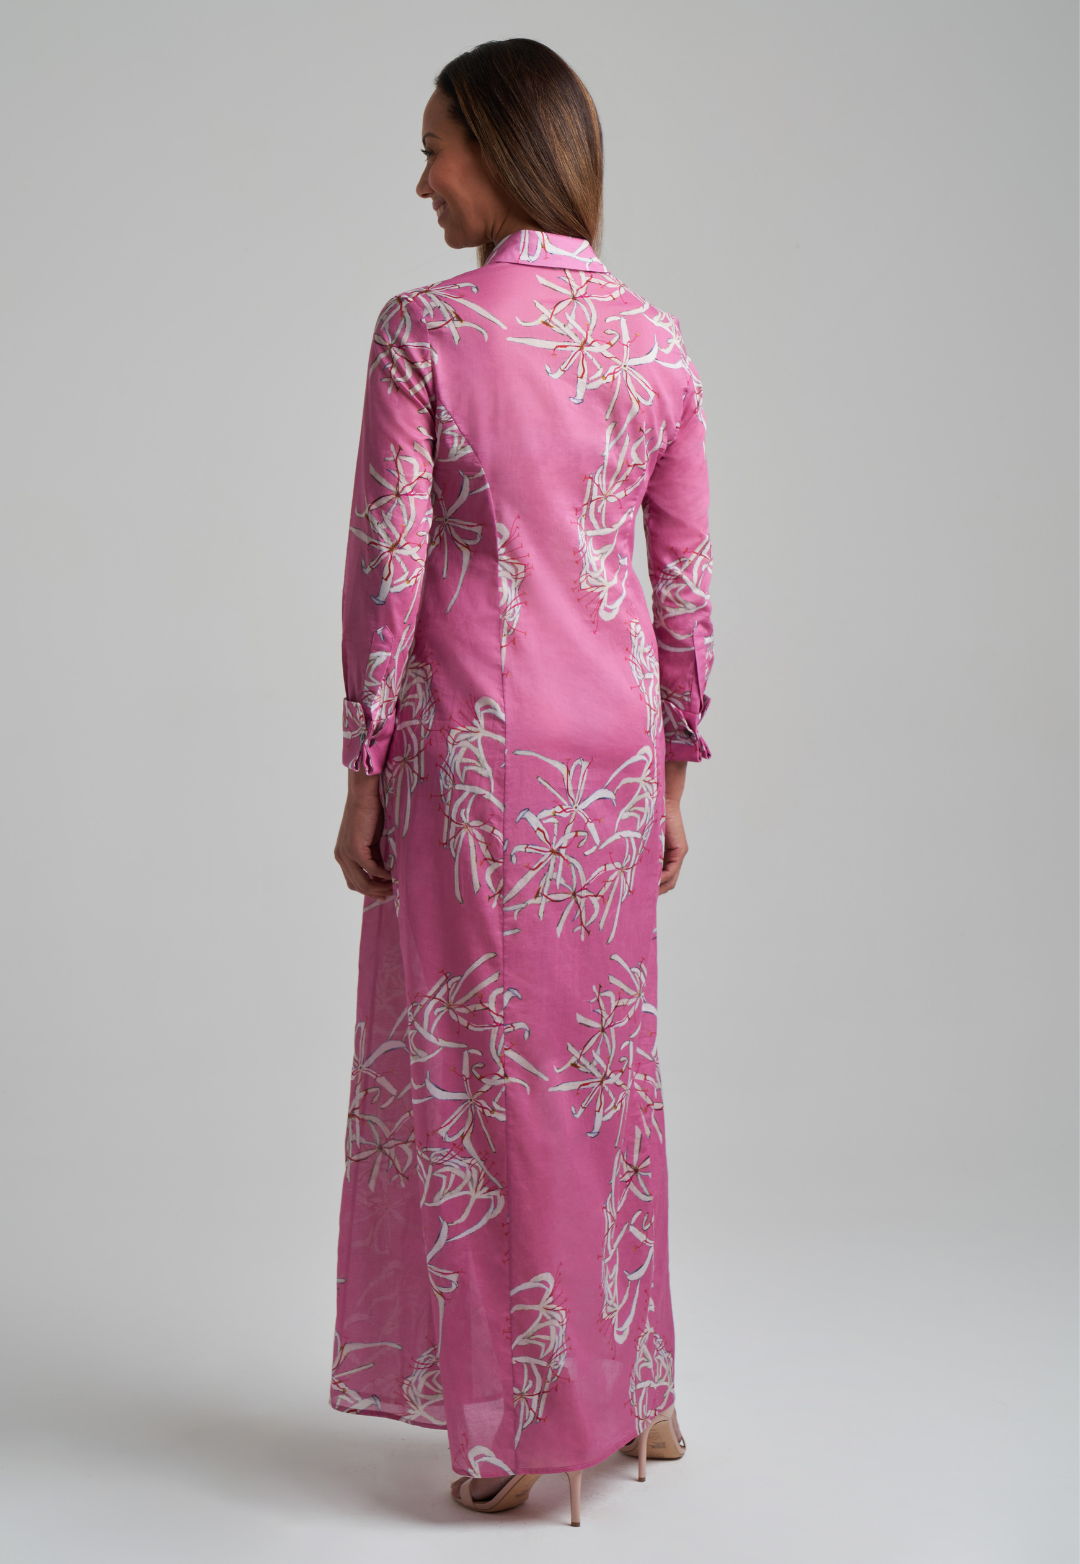 Woman wearing long cotton shirt dress in pink spider lily print by Ala von Auersperg for spring summer 2021